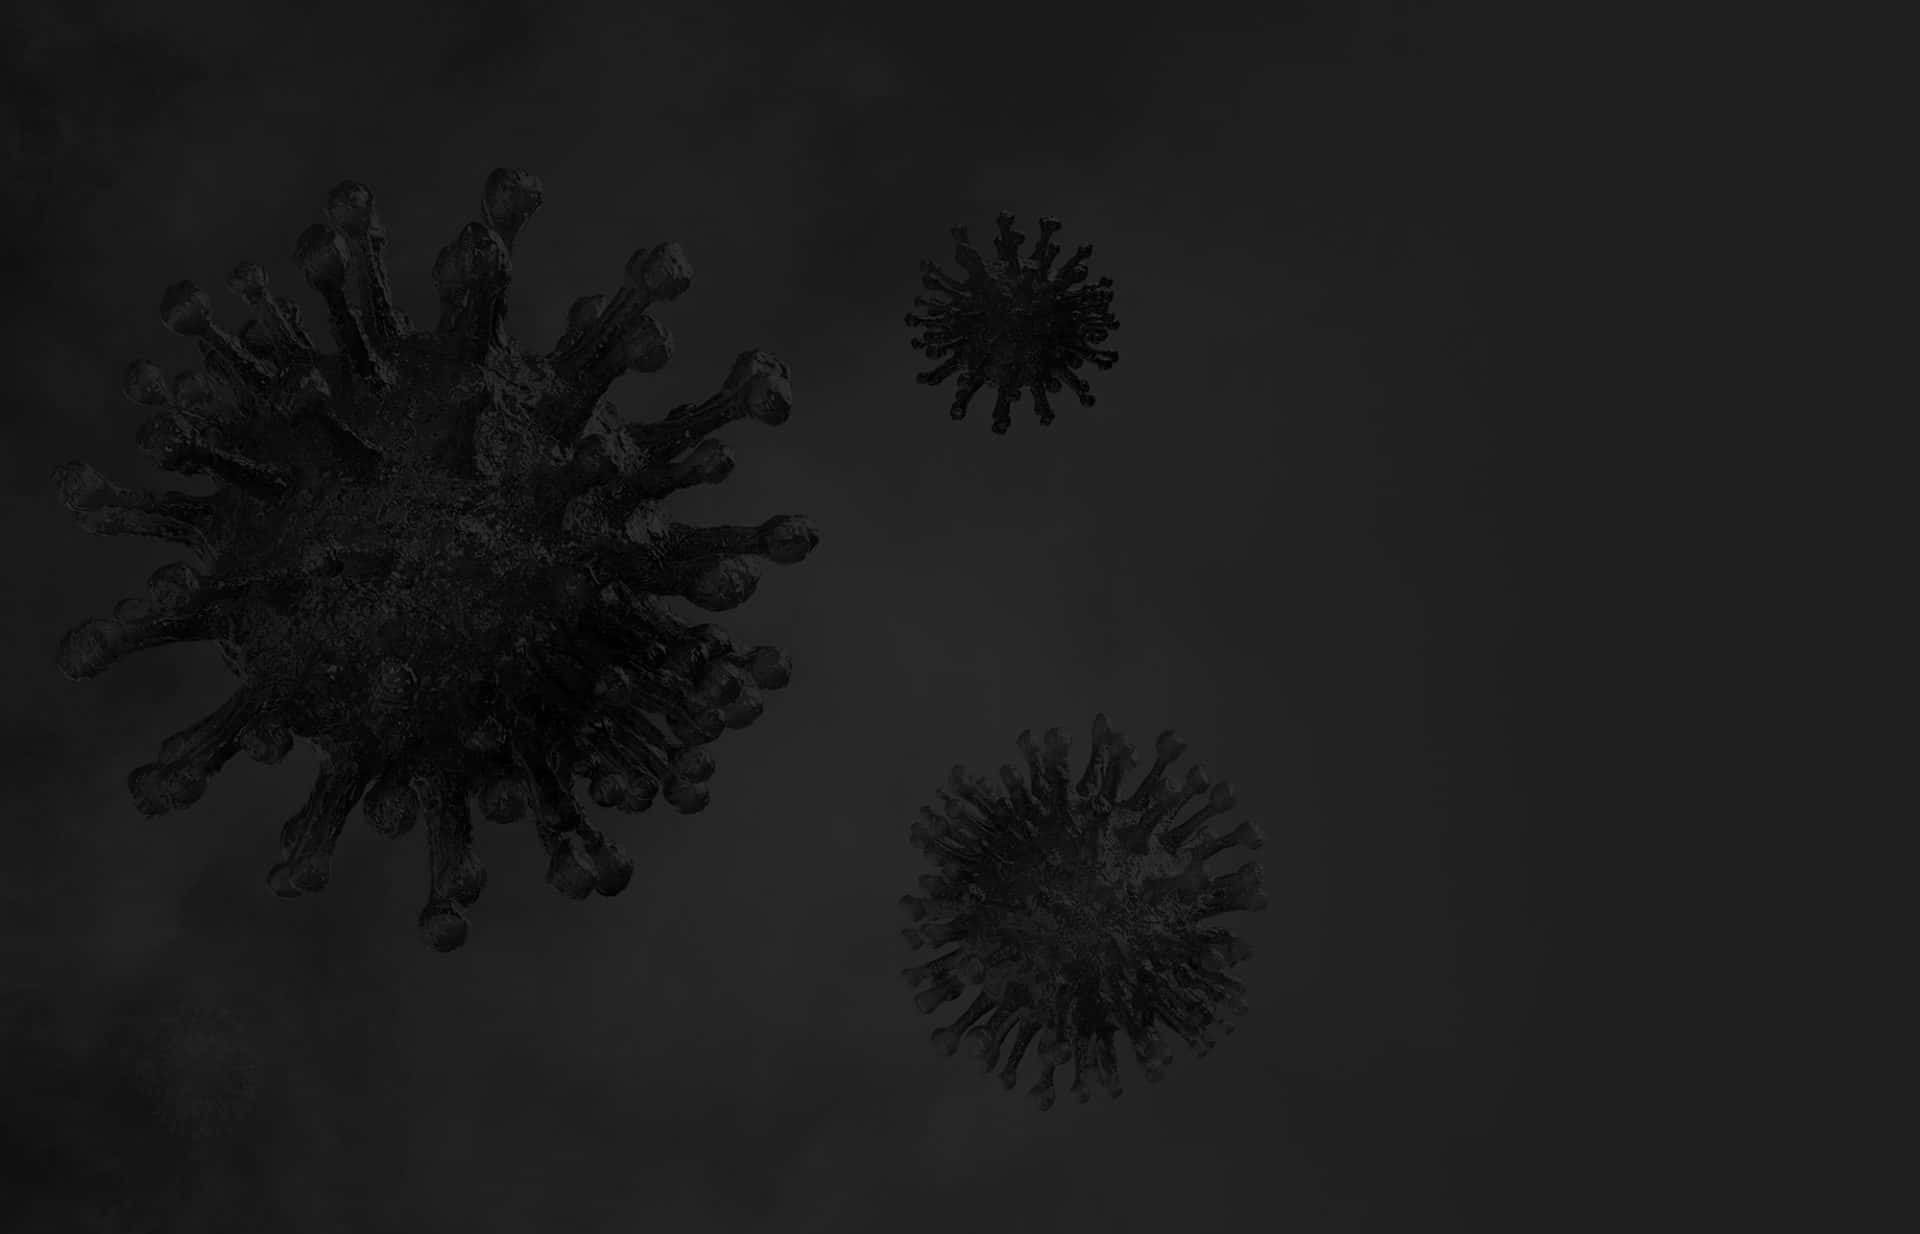 Coronaviruses In The Air In Black And White